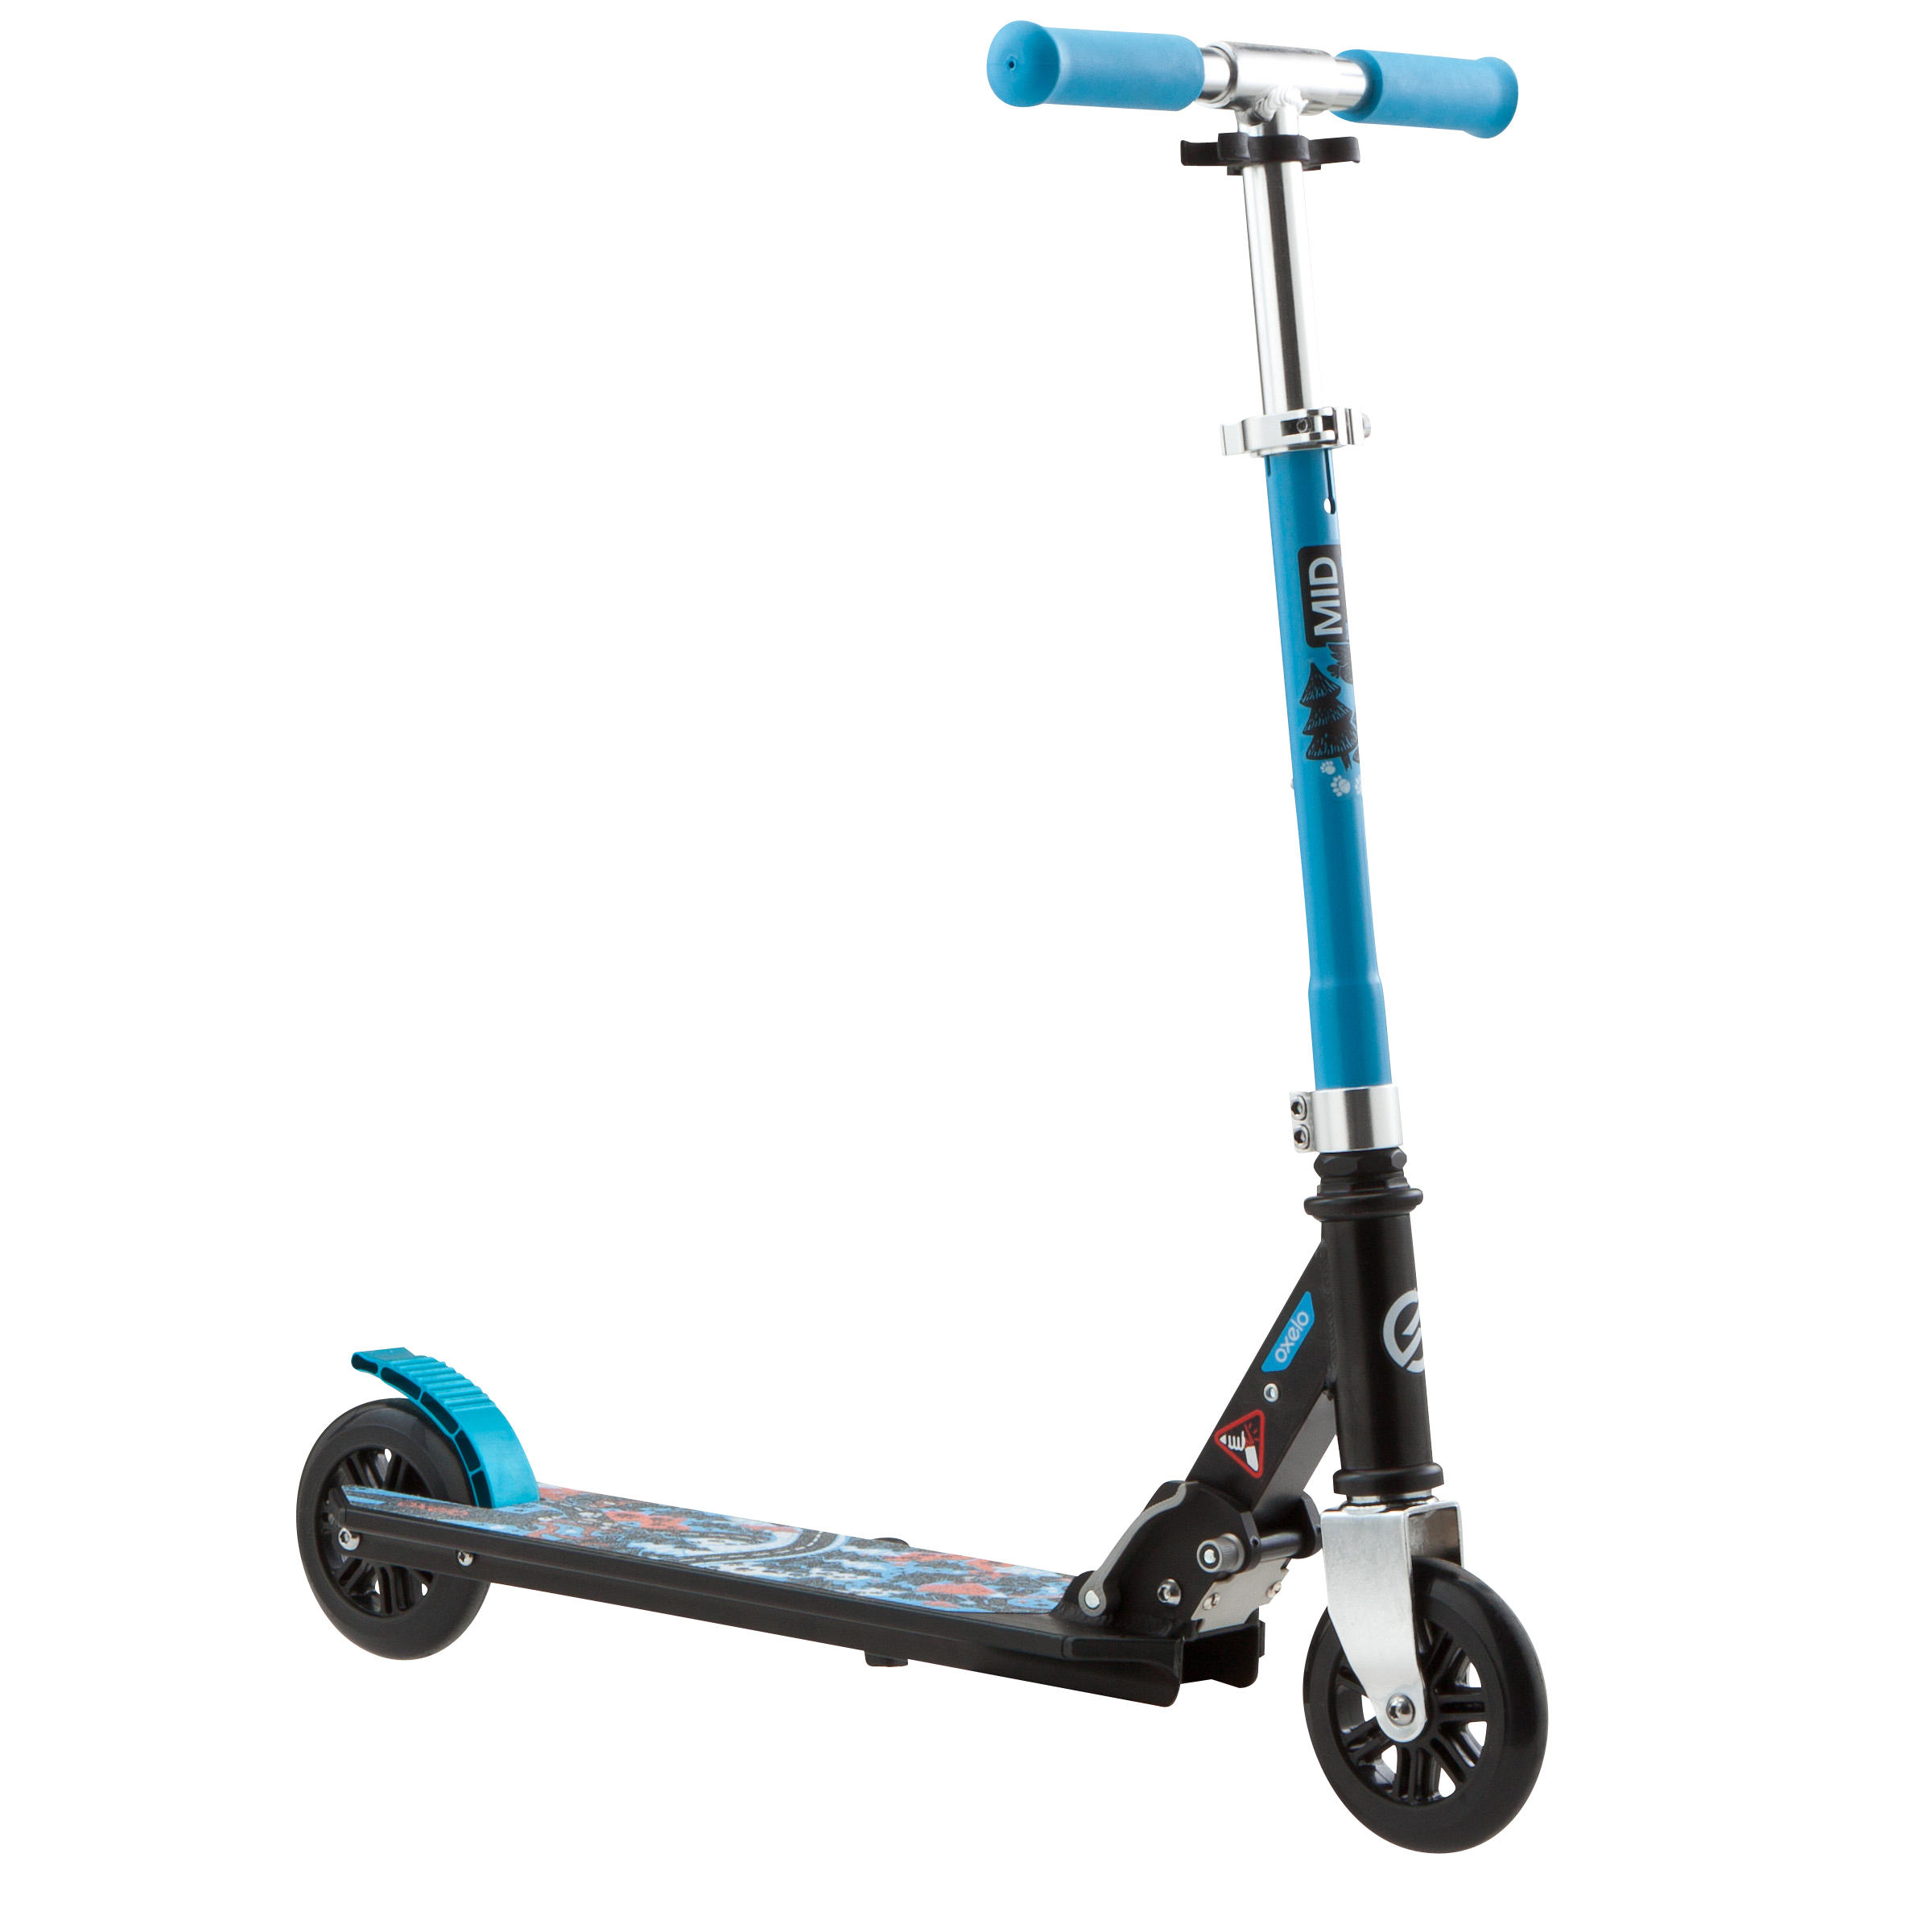 OXELO Mid 1 Kids' Scooter - Blue